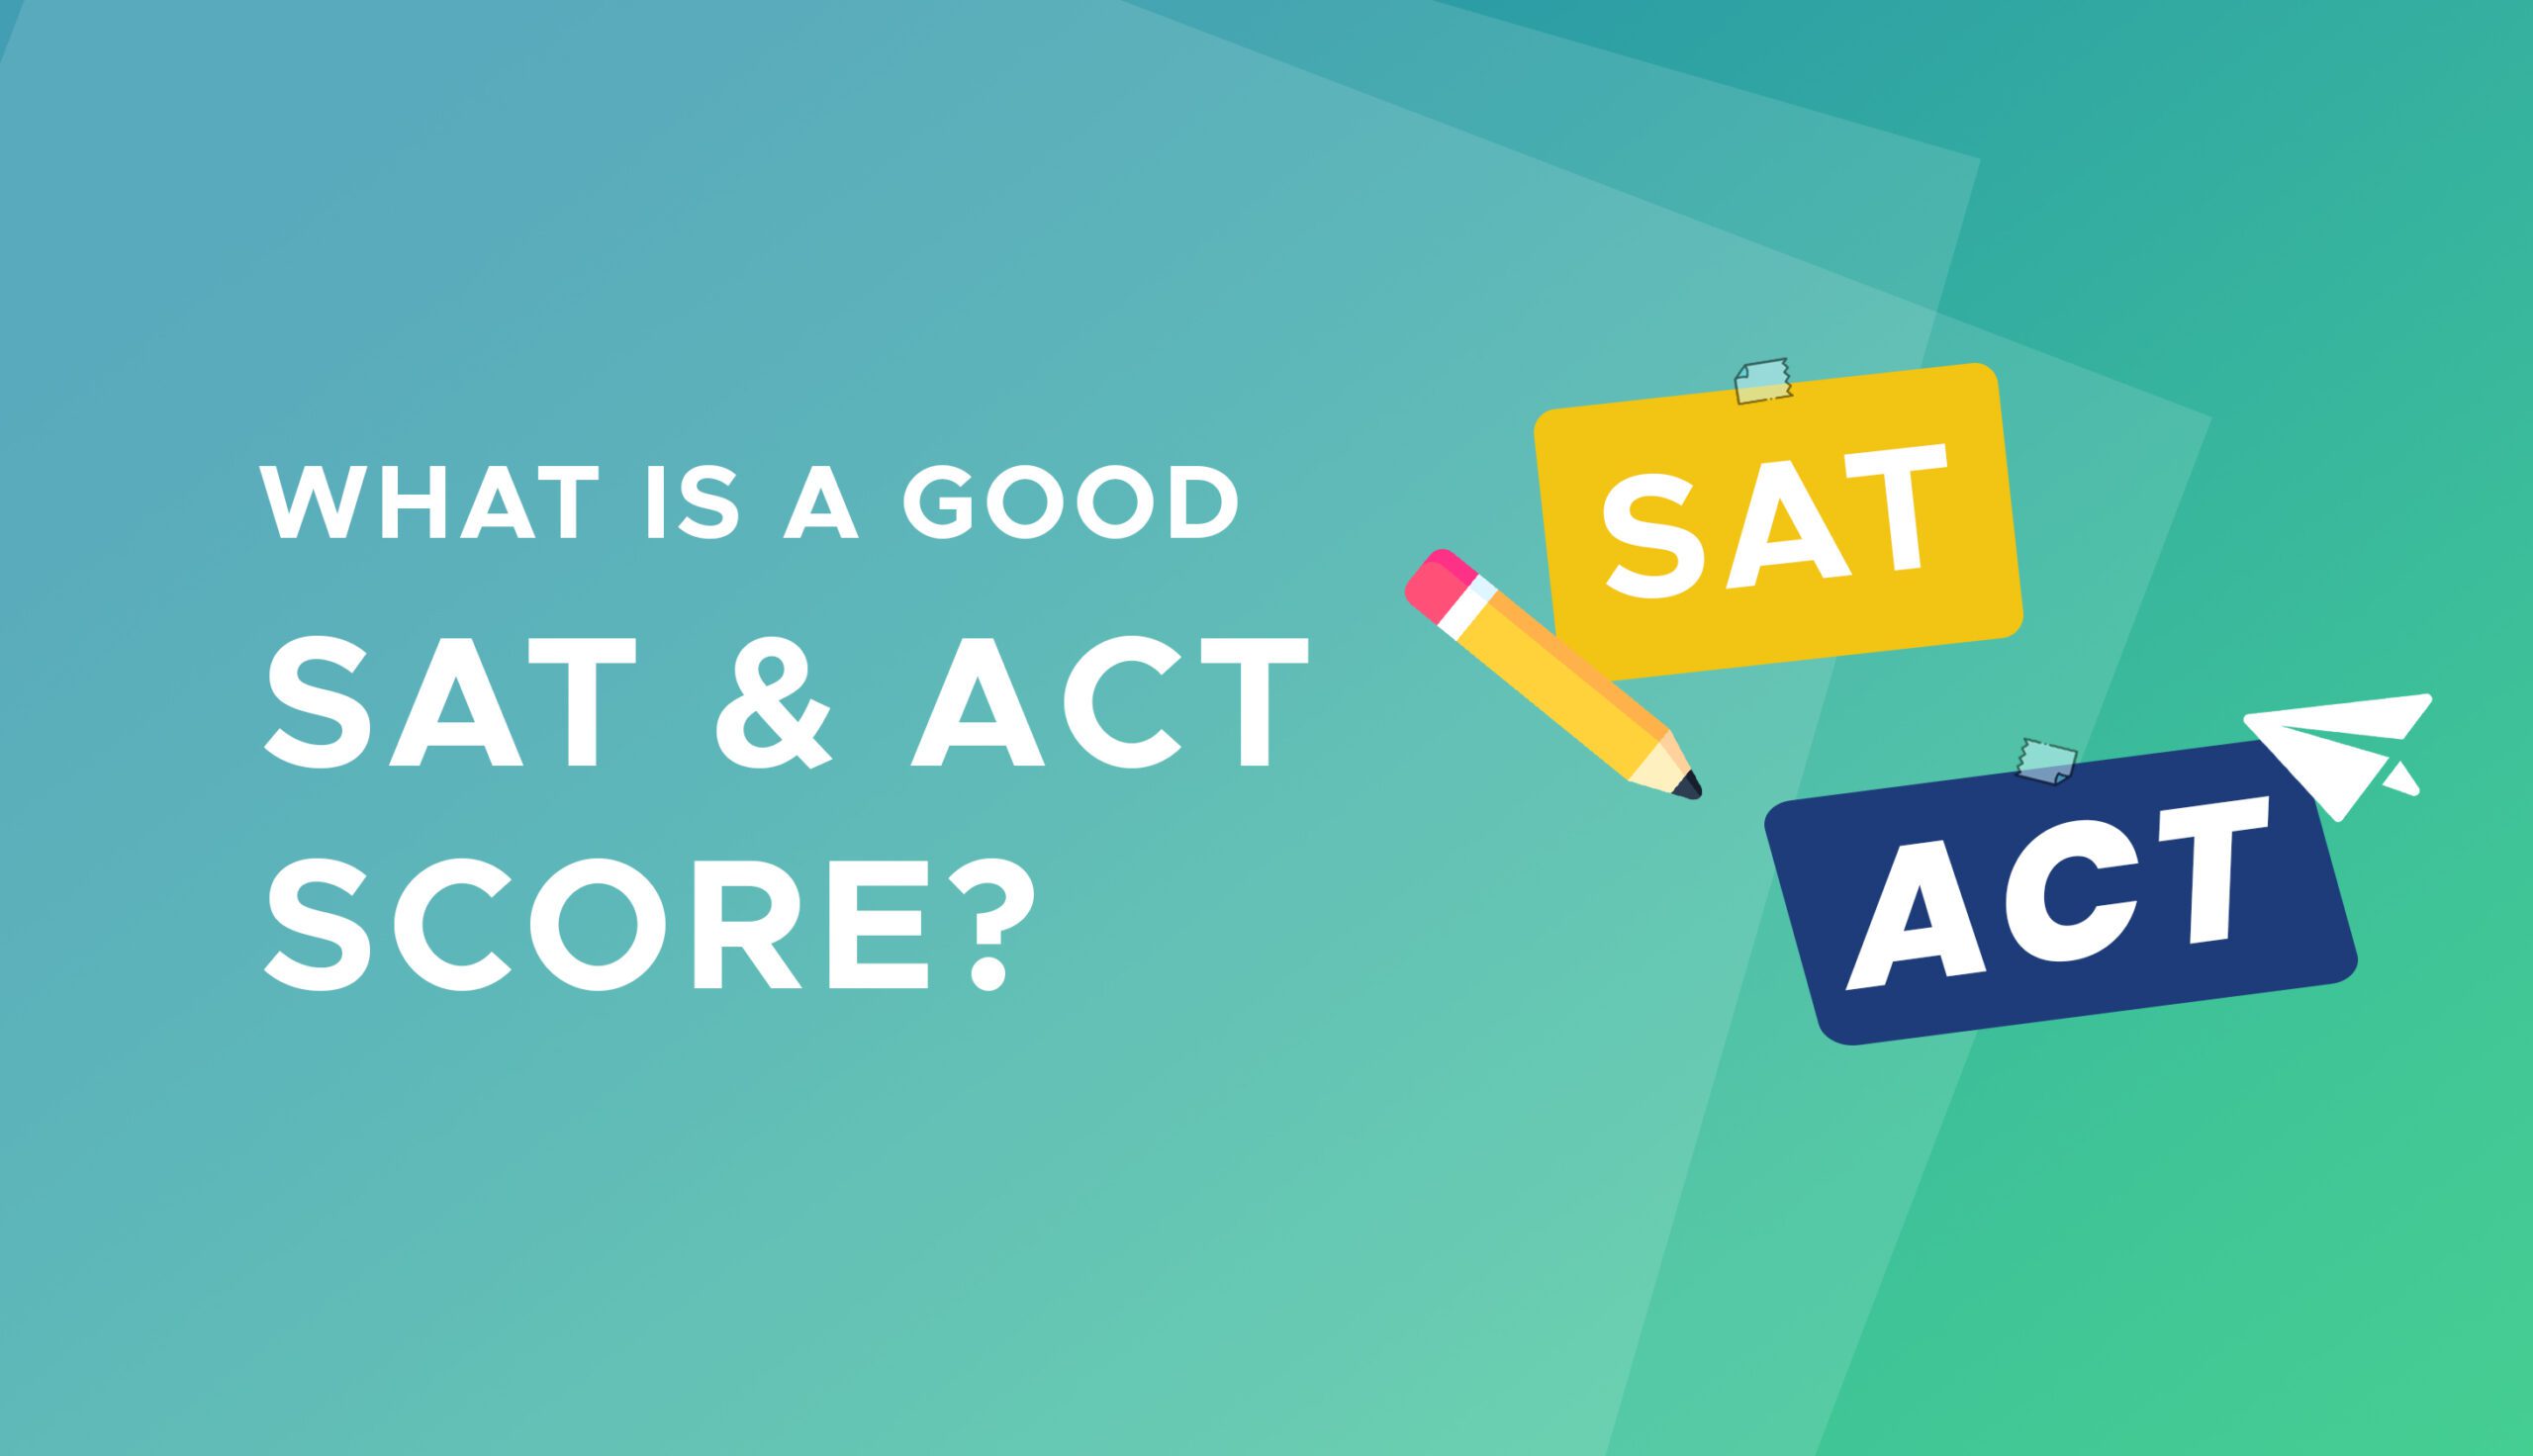 What is a good SAT score? What is a good ACT score?